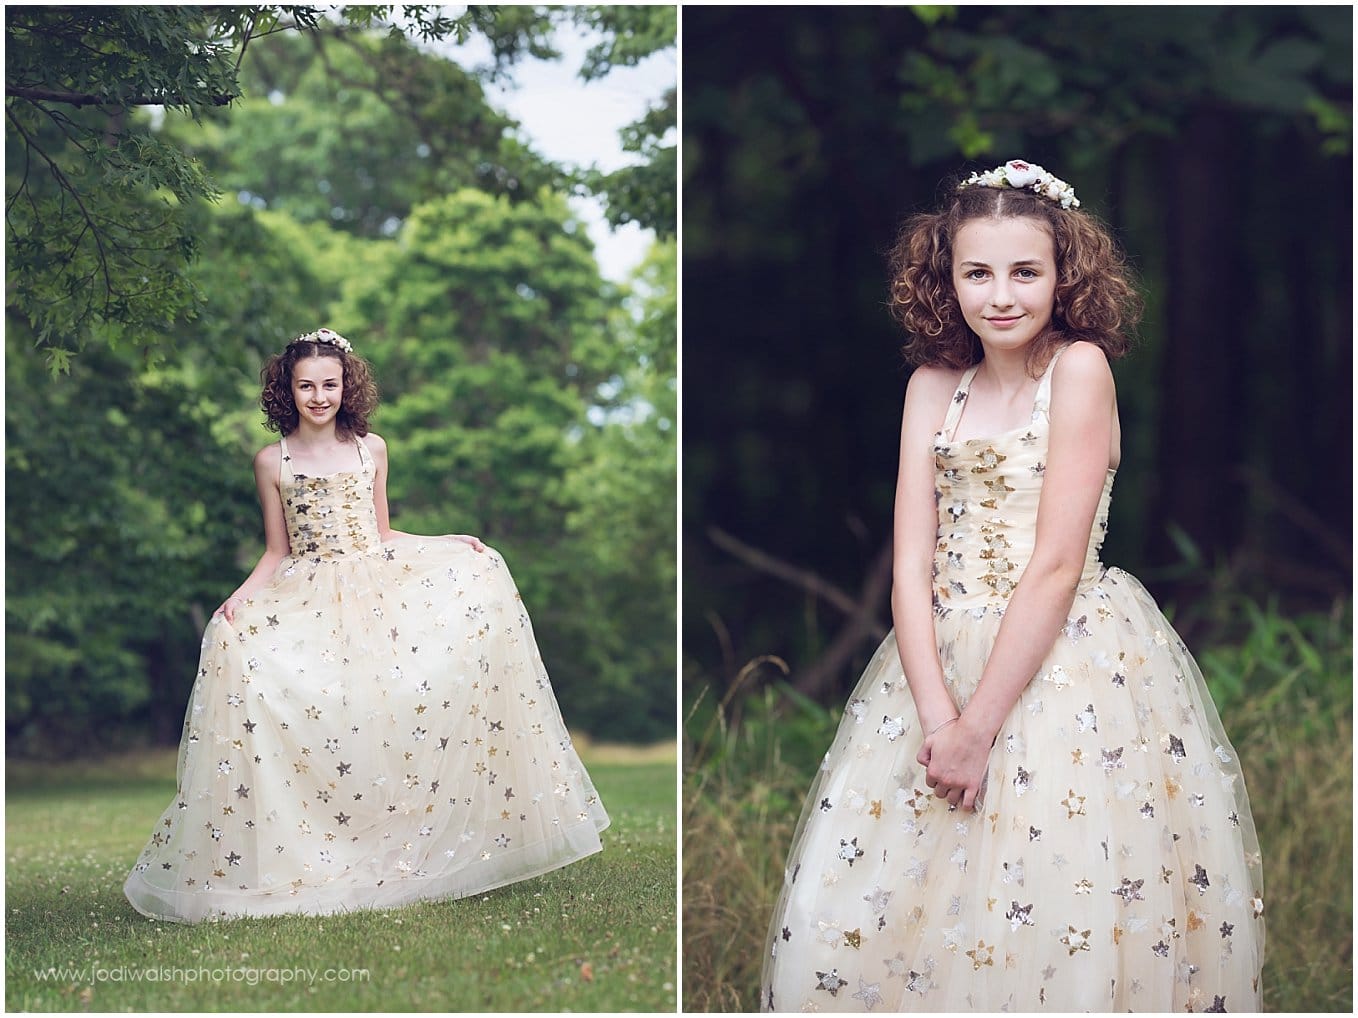 image of a girl wearing a gold princess dress. She has brown curly hair and is standing in North Park.